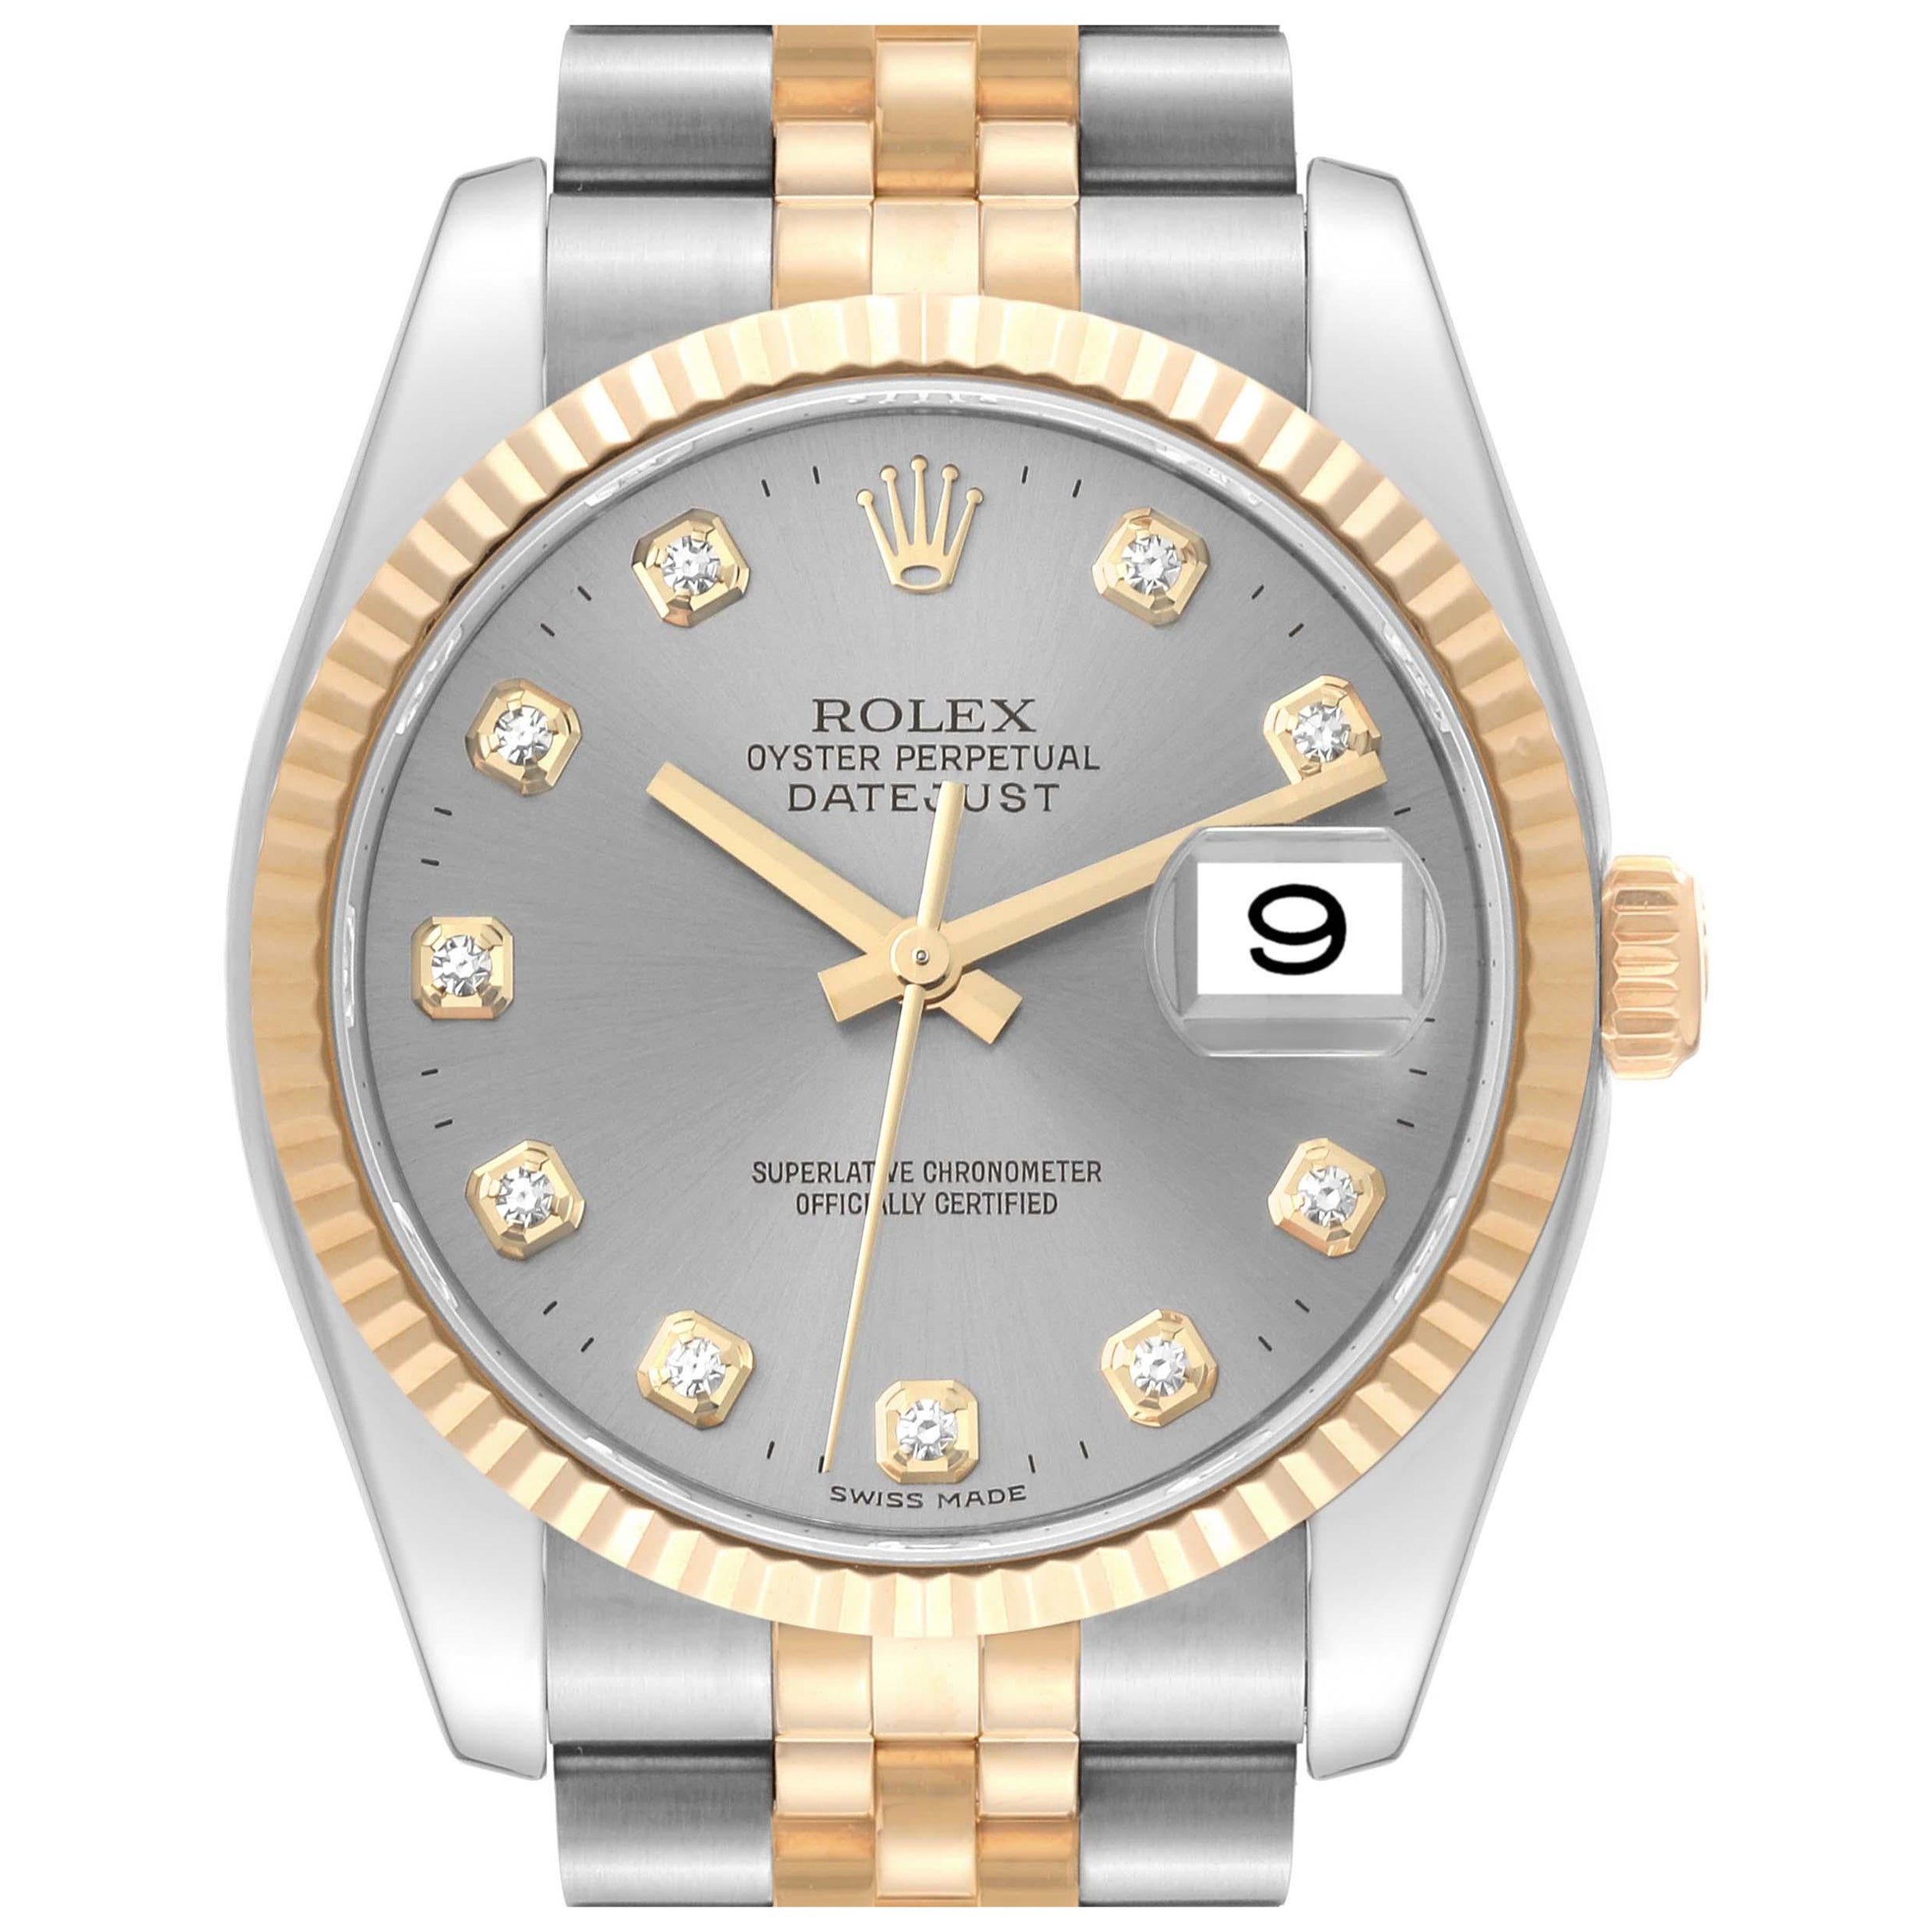 Rolex Datejust Steel Yellow Gold Diamond Dial Mens Watch 116233 Box Papers For Sale